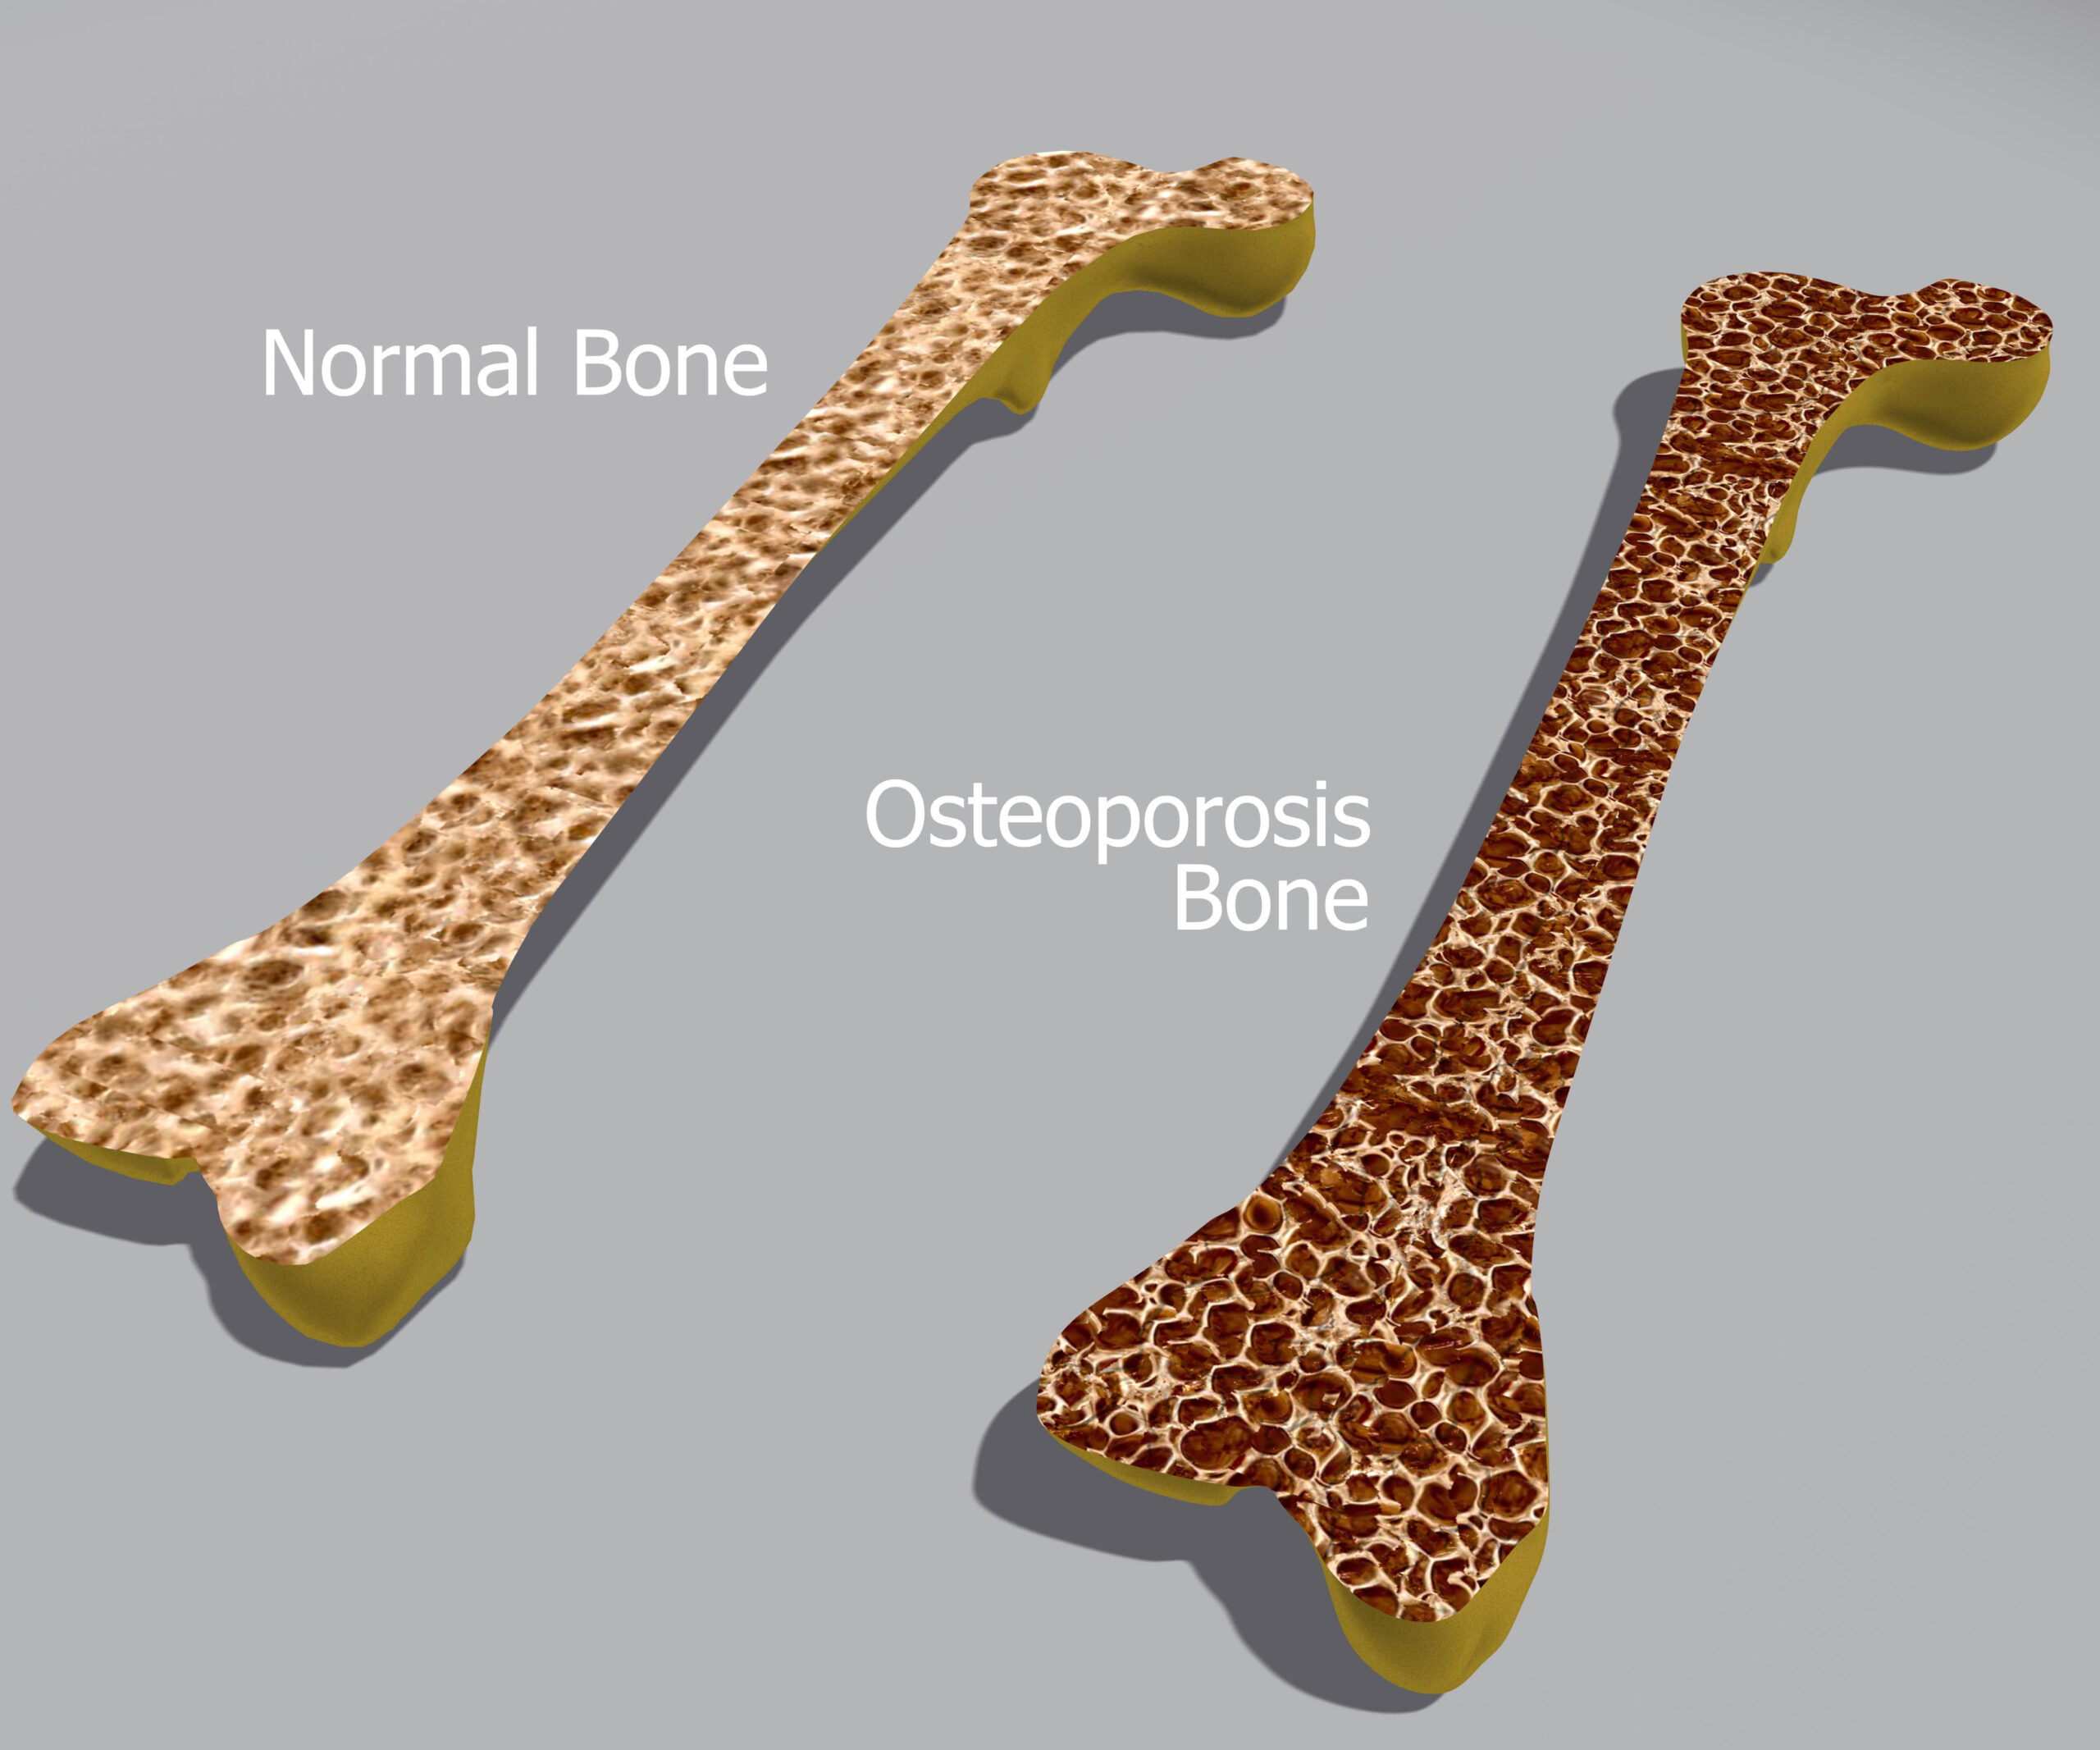 Coping with osteoporosis: Are you doing enough to protect your bones?